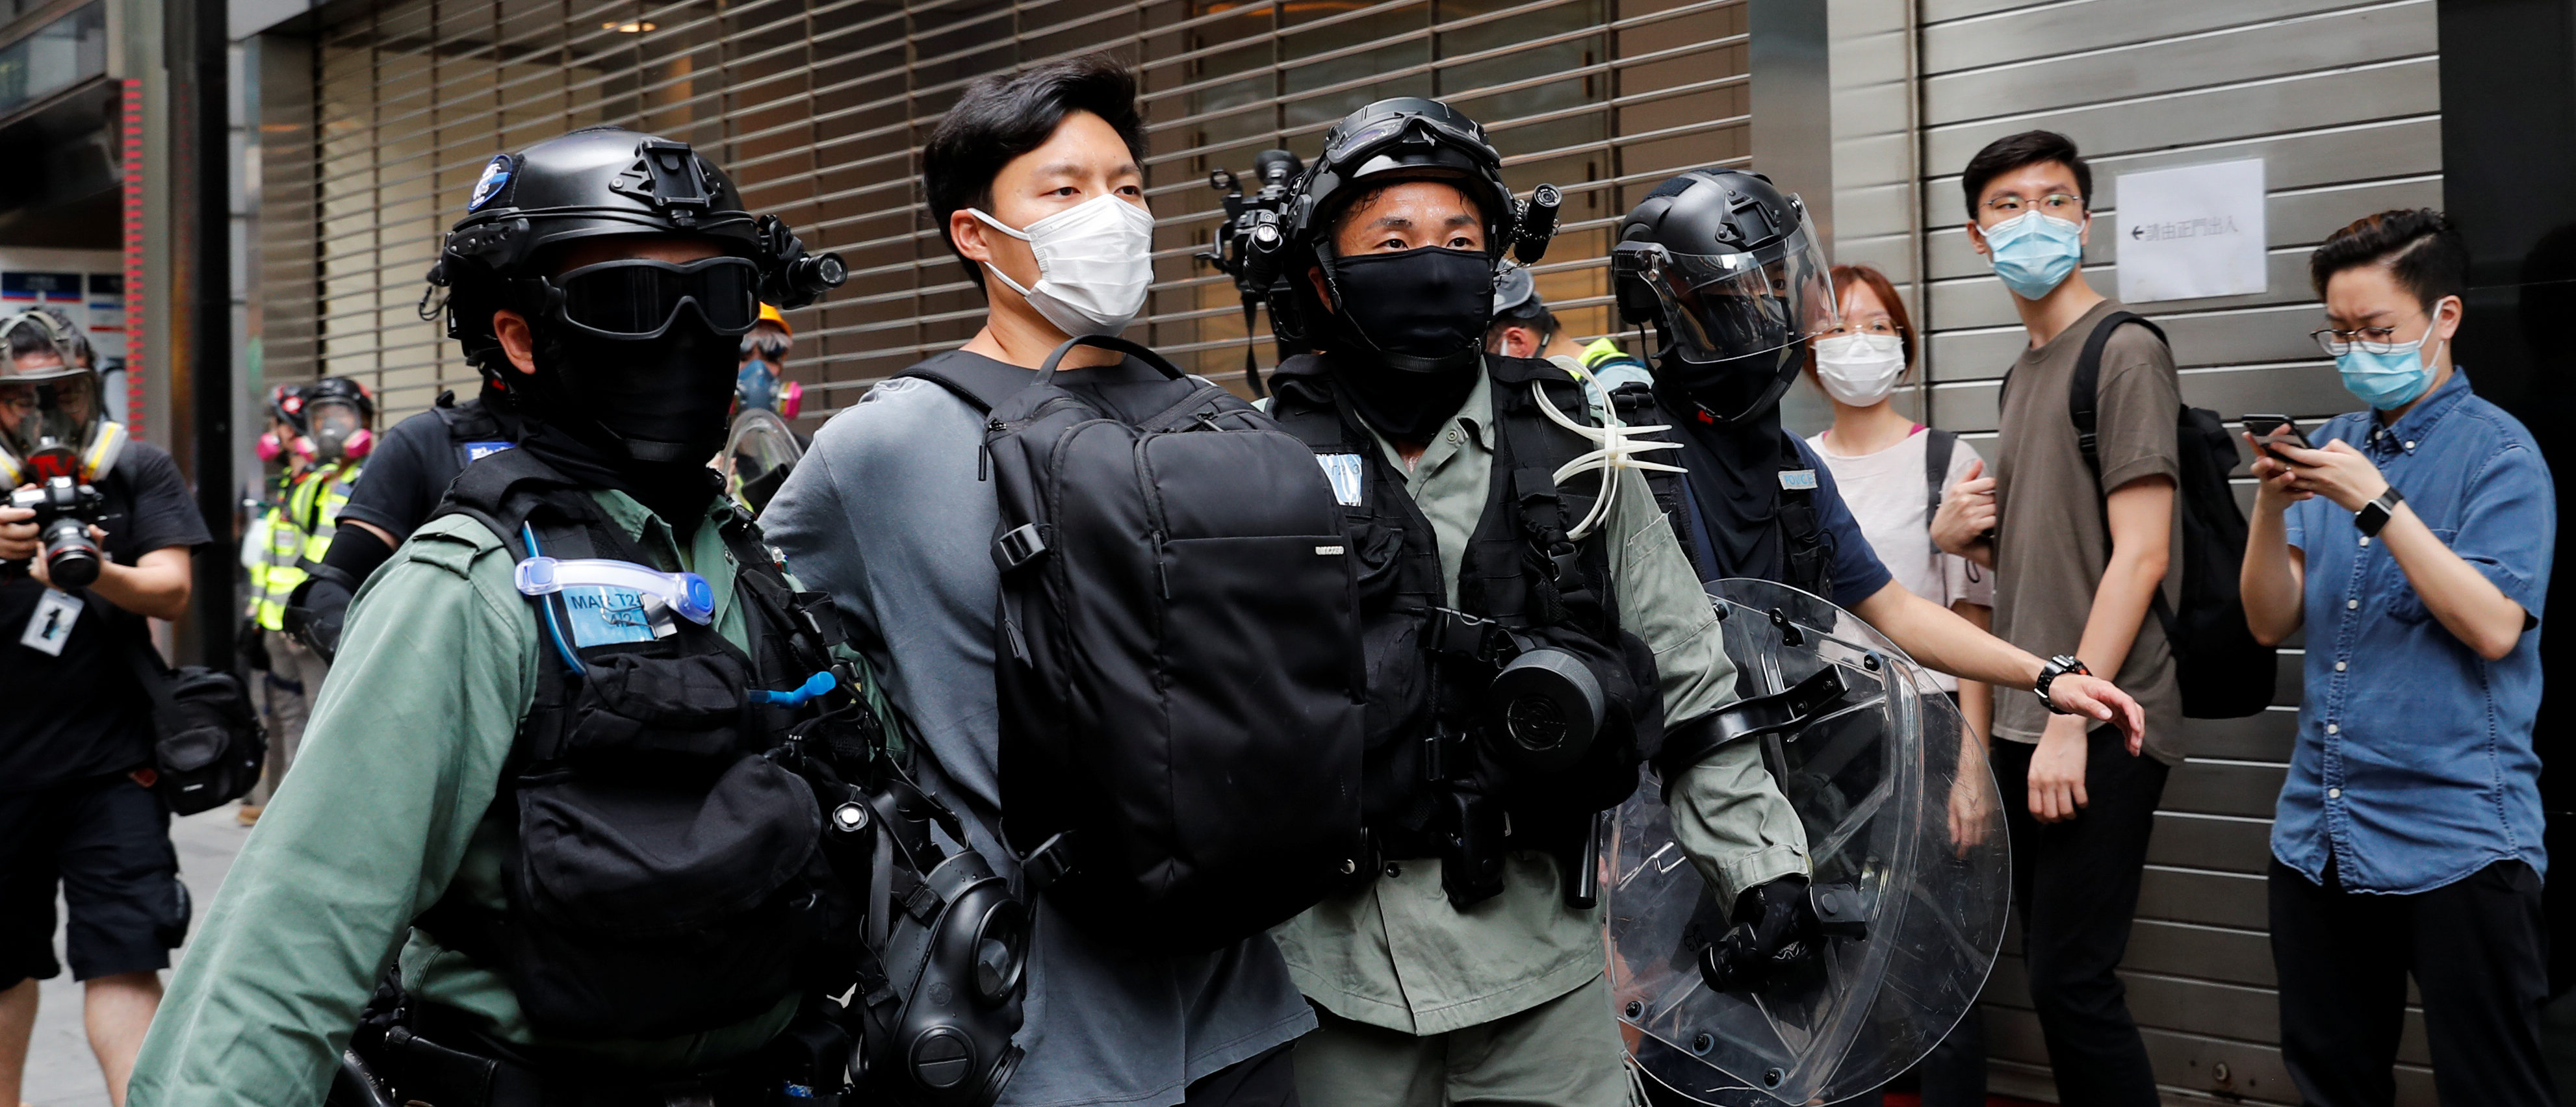 Riot police officers detain a demonstrator during a protest against the second reading of a controversial national anthem law in Hong Kong, China May 27, 2020. REUTERS/Tyrone Siu - RC2TWG9CRF57